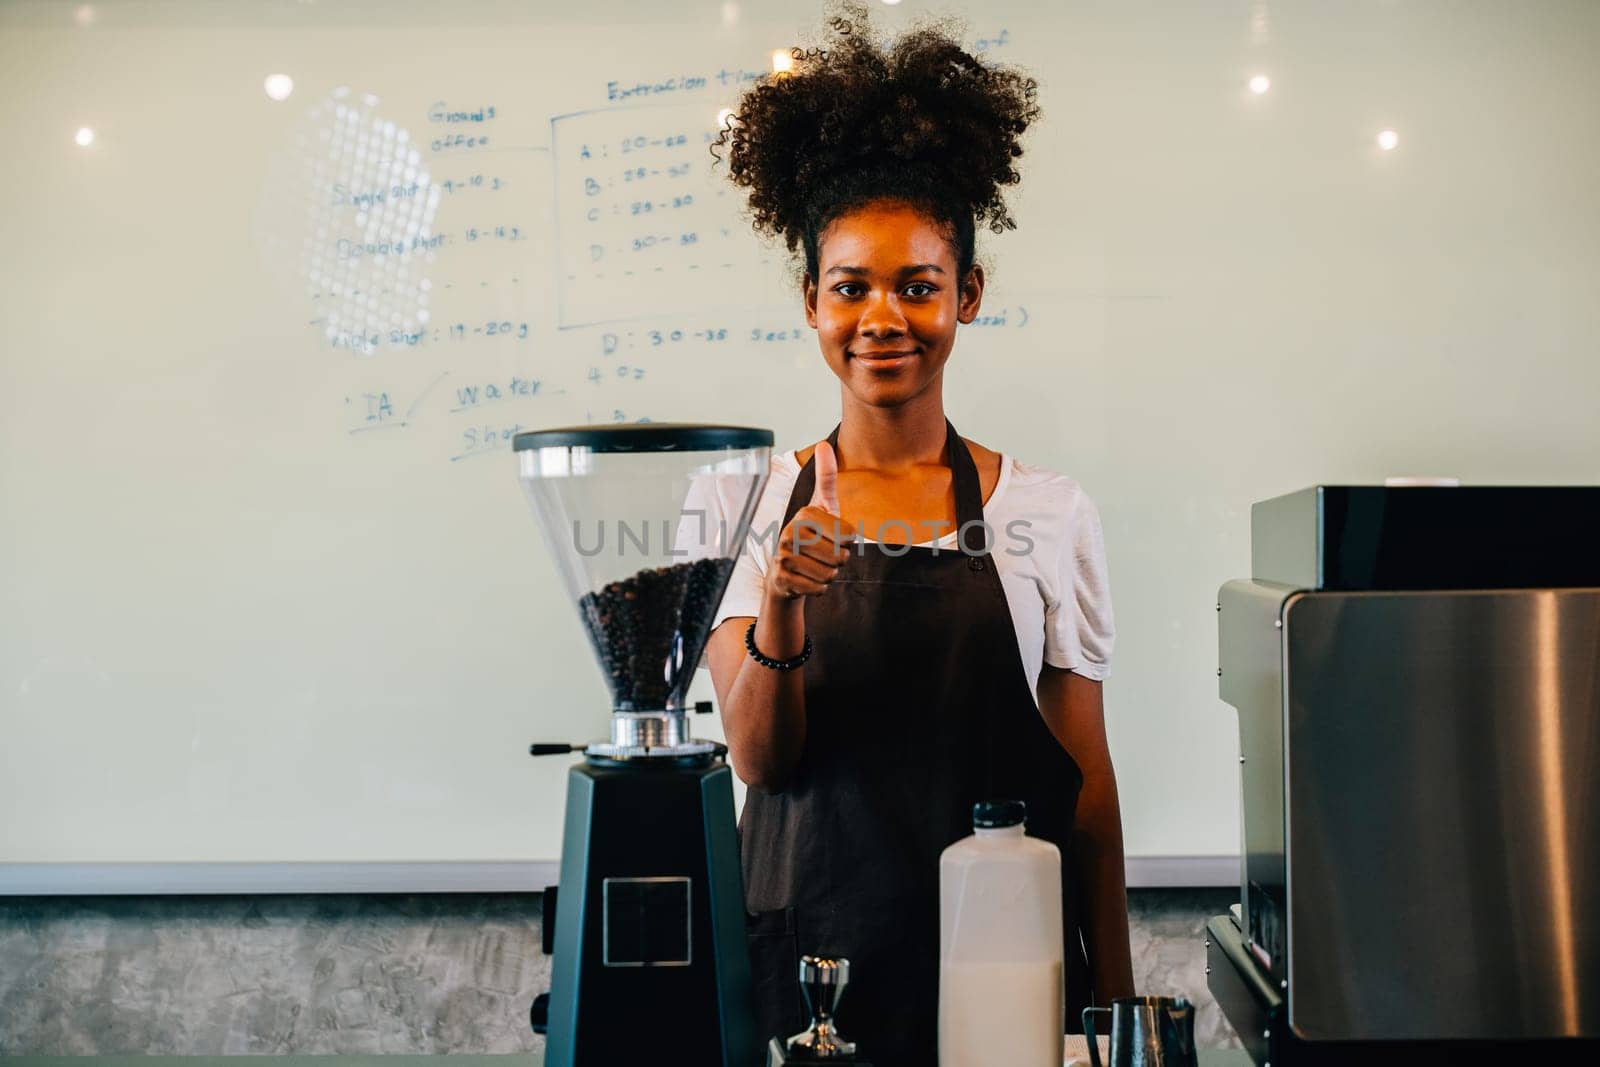 At the cafe a confident black woman stands at the counter. Portrait of owner a successful businesswoman in uniform smiling with satisfaction ensuring customer service. Inside a small business cafe by Sorapop